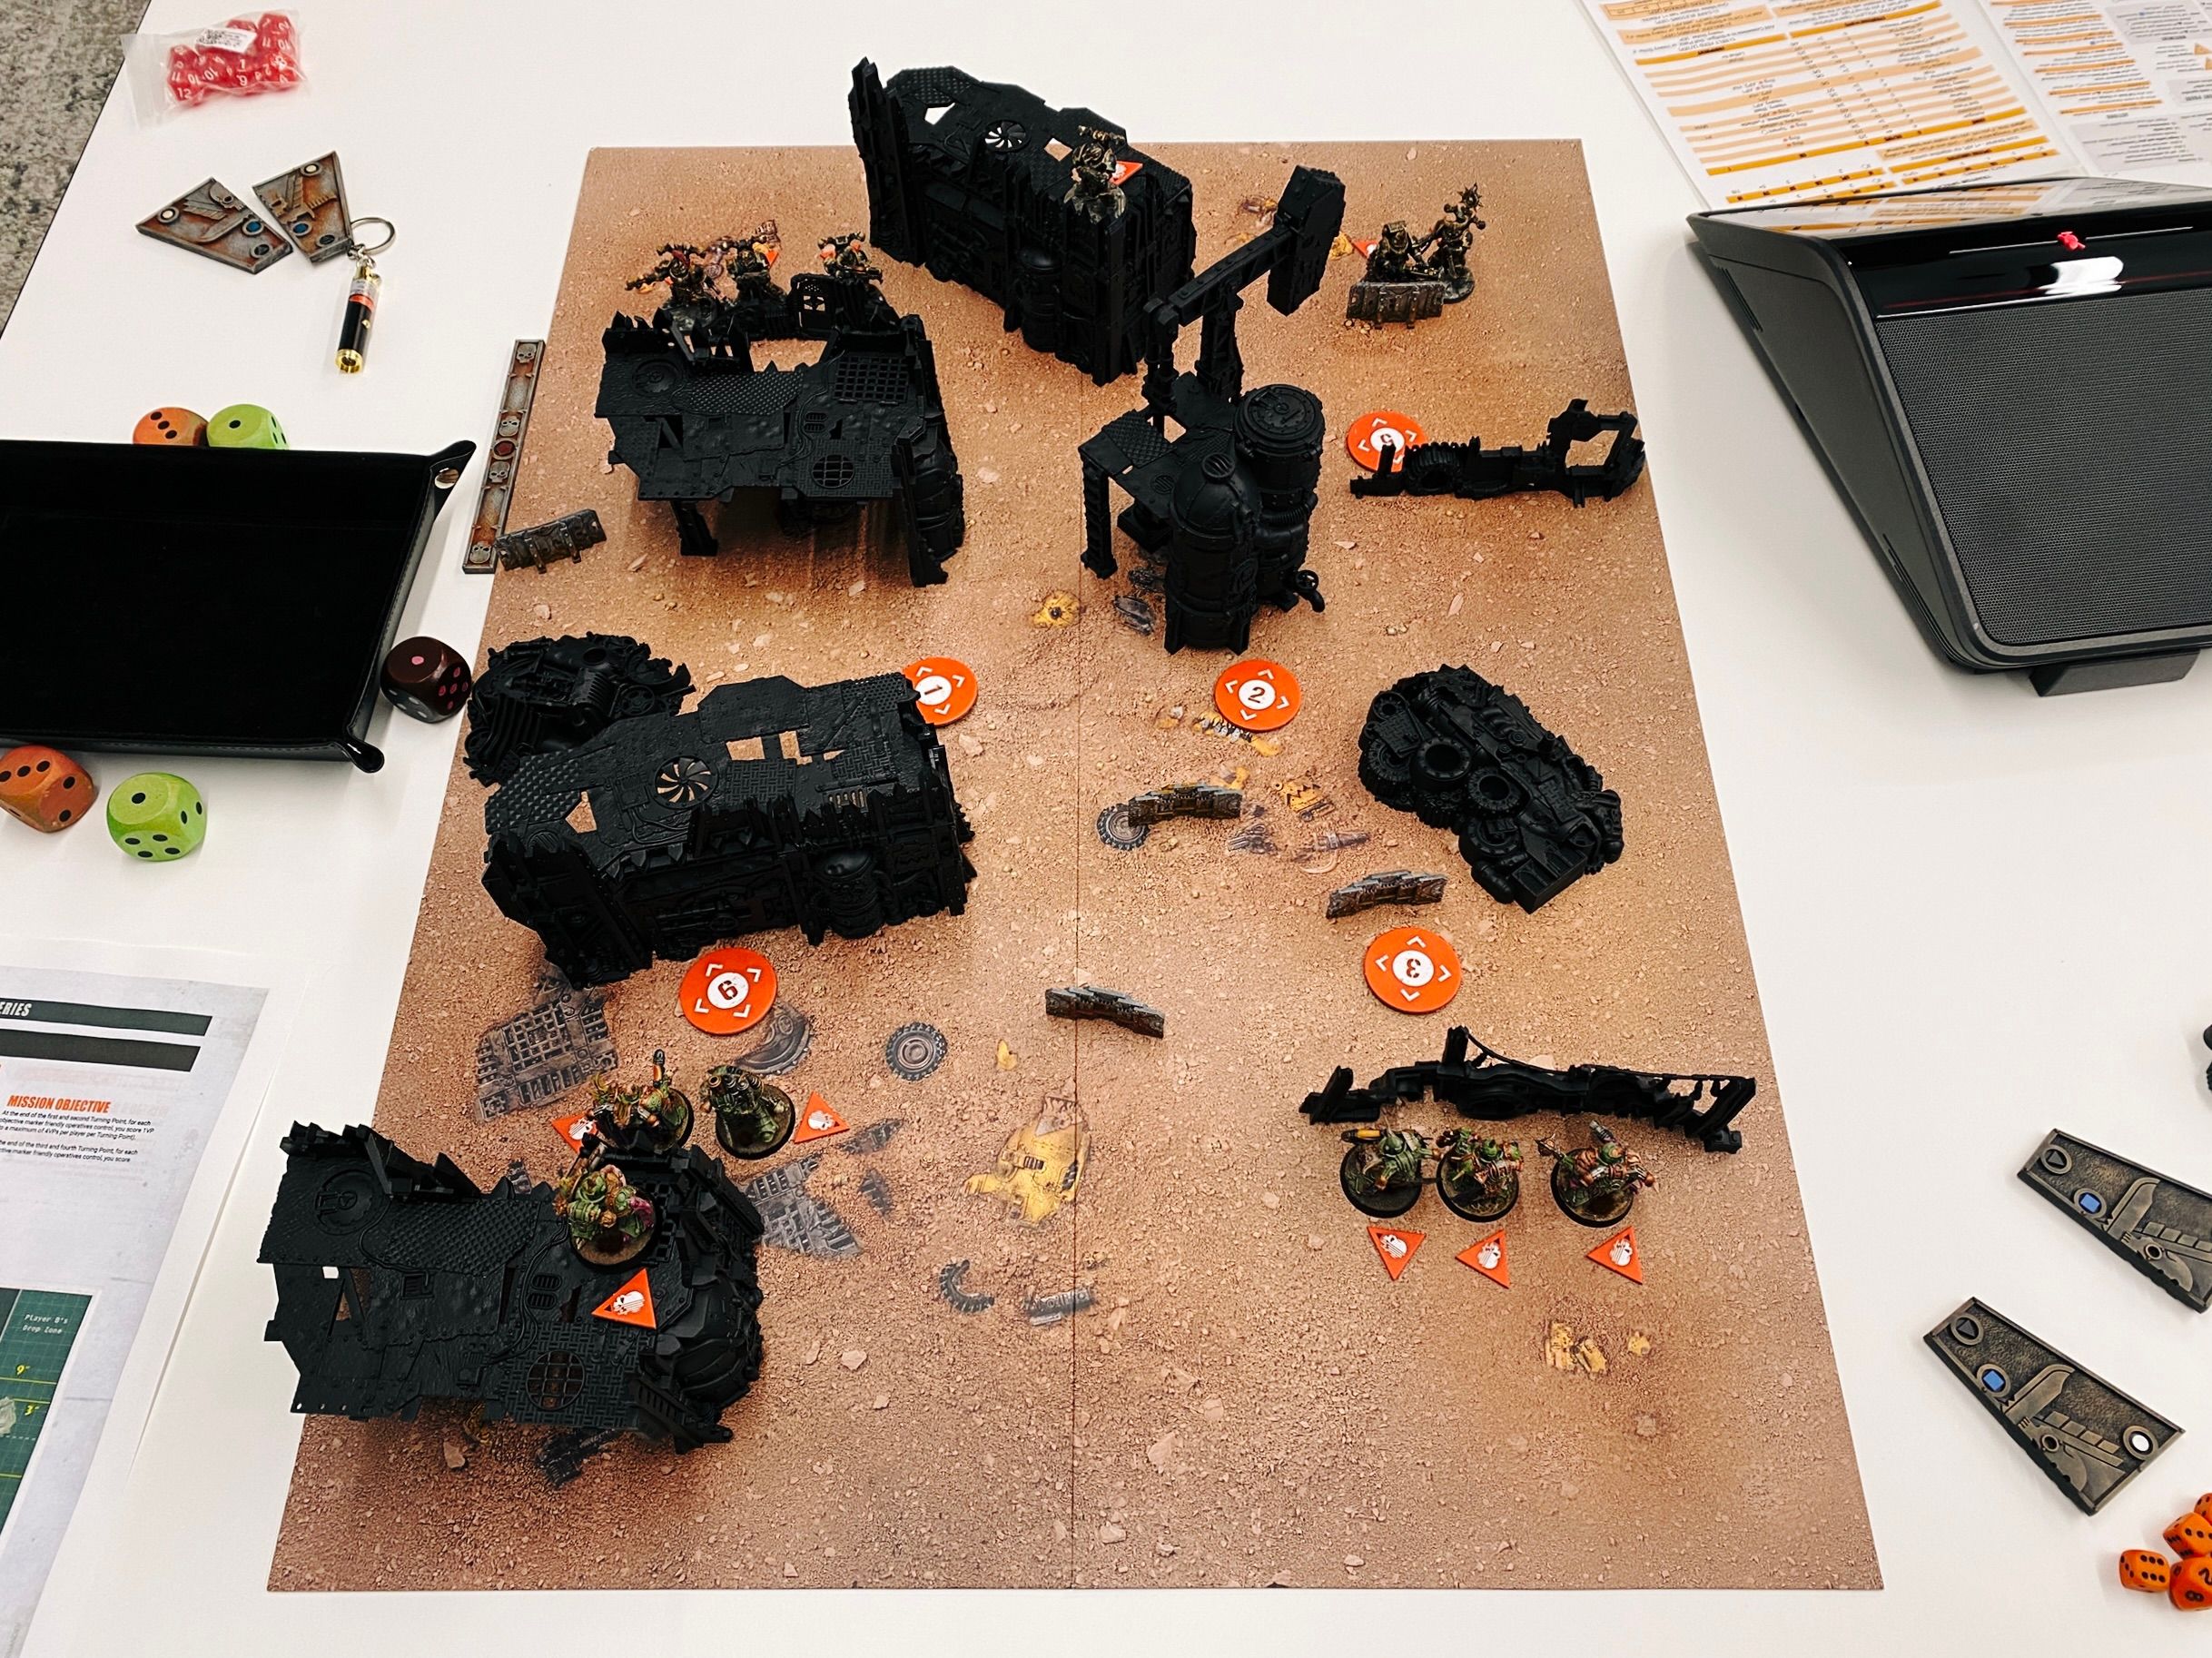 A photo of a Warhammer 40,000 game board, with painted miniatures and shamefully unpainted terrain that looks like a junkyard on it.